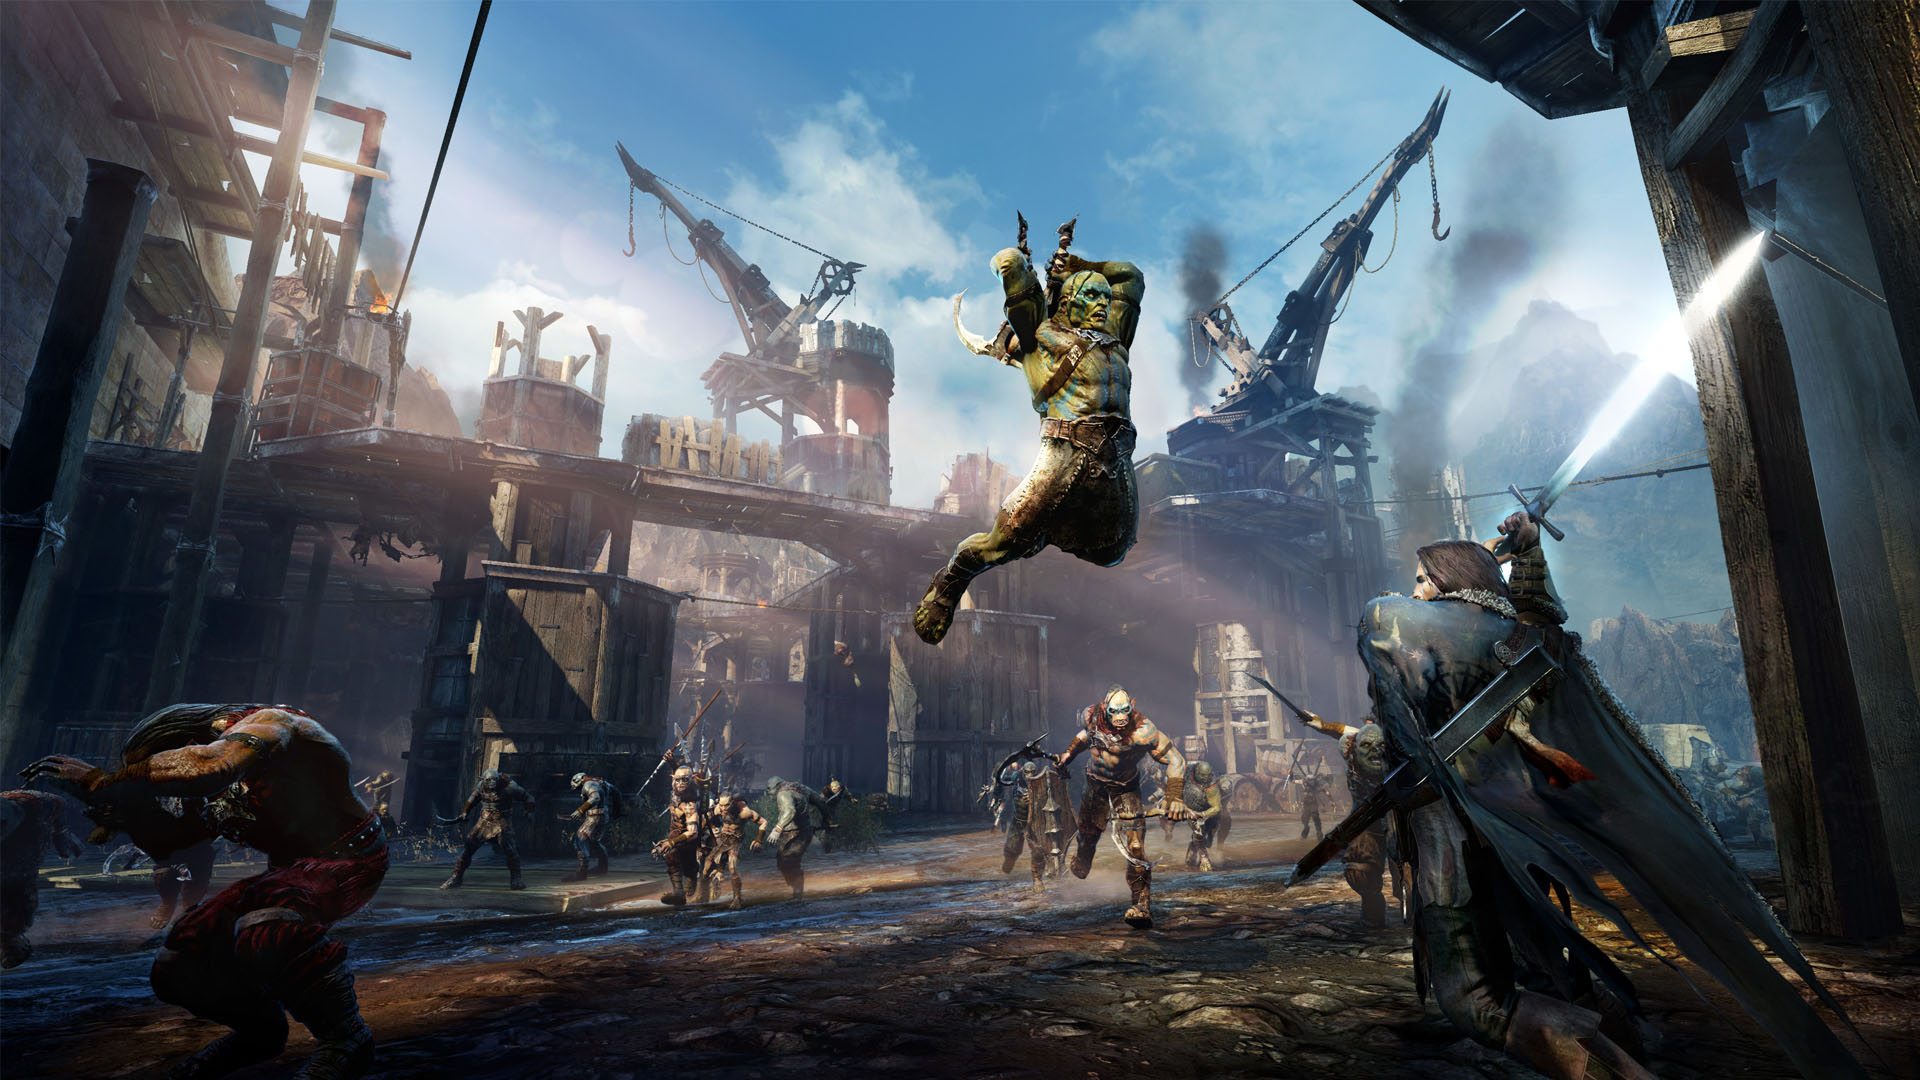 MIDDLE EARTH SHADOW of MORDOR GAME OF THE YEAR EDITION (2014 PS4